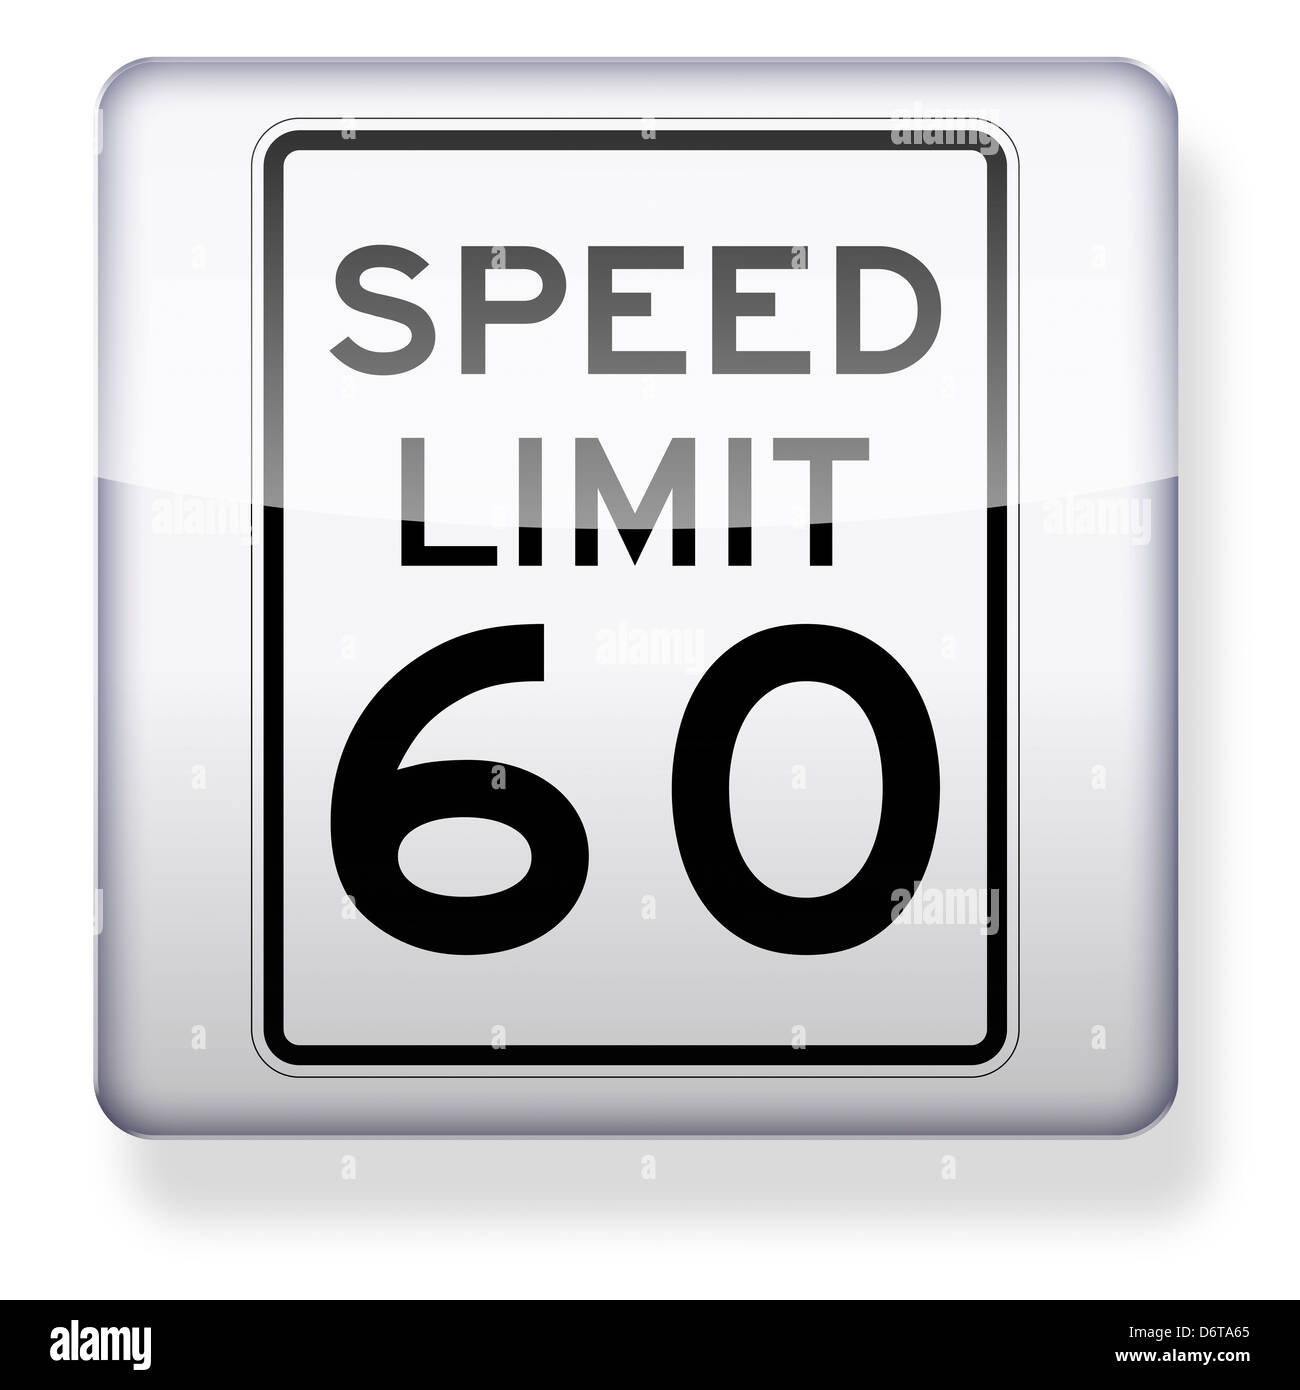 US speed limit 60mph as an app icon. Clipping path included. Stock Photo